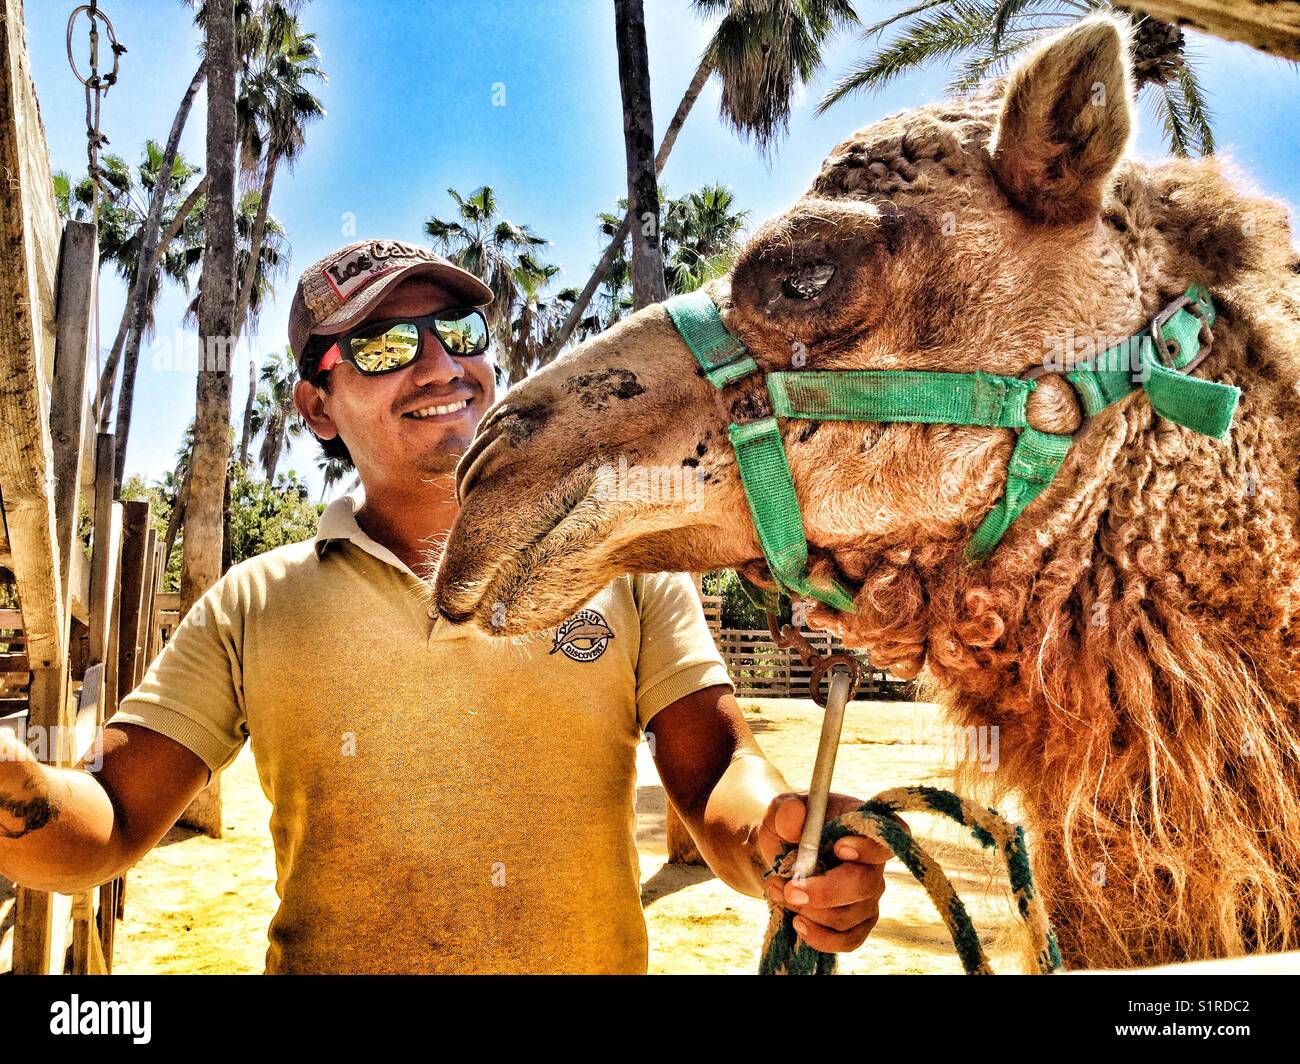 A camel and his caretaker. Stock Photo